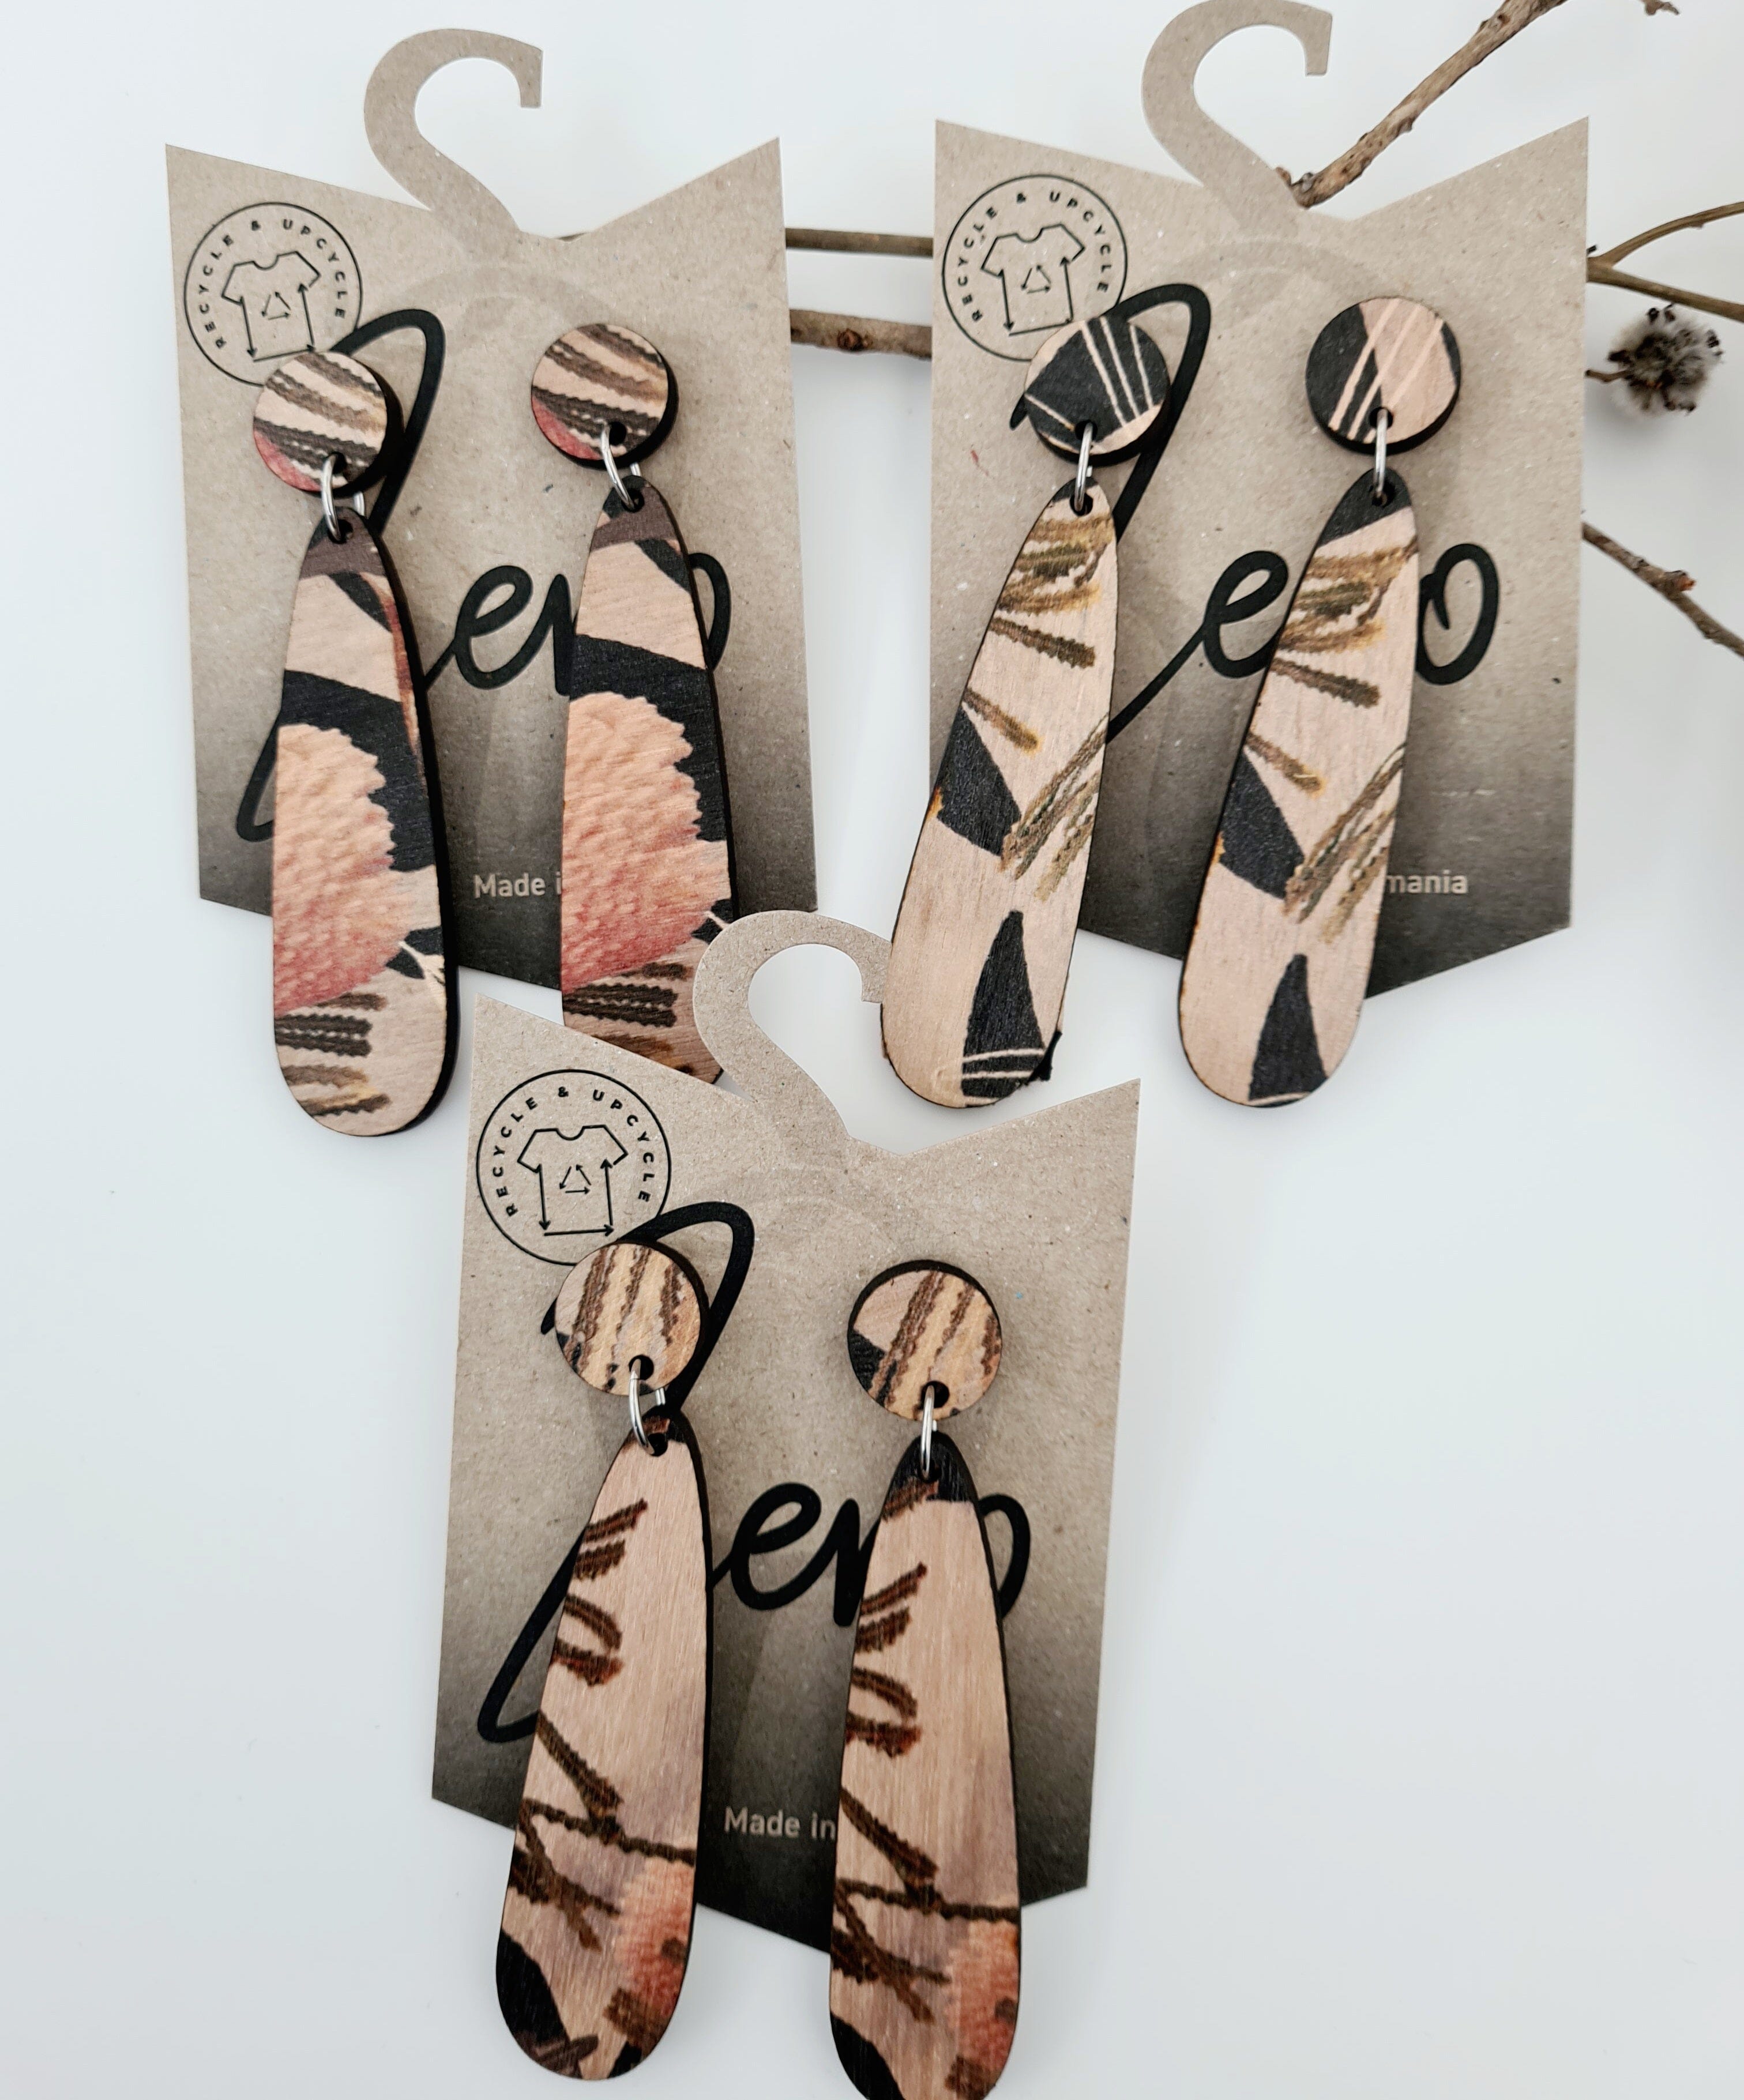 Large Earrings - Zero Waste Australian Timber Earrings The Spotted Quoll 